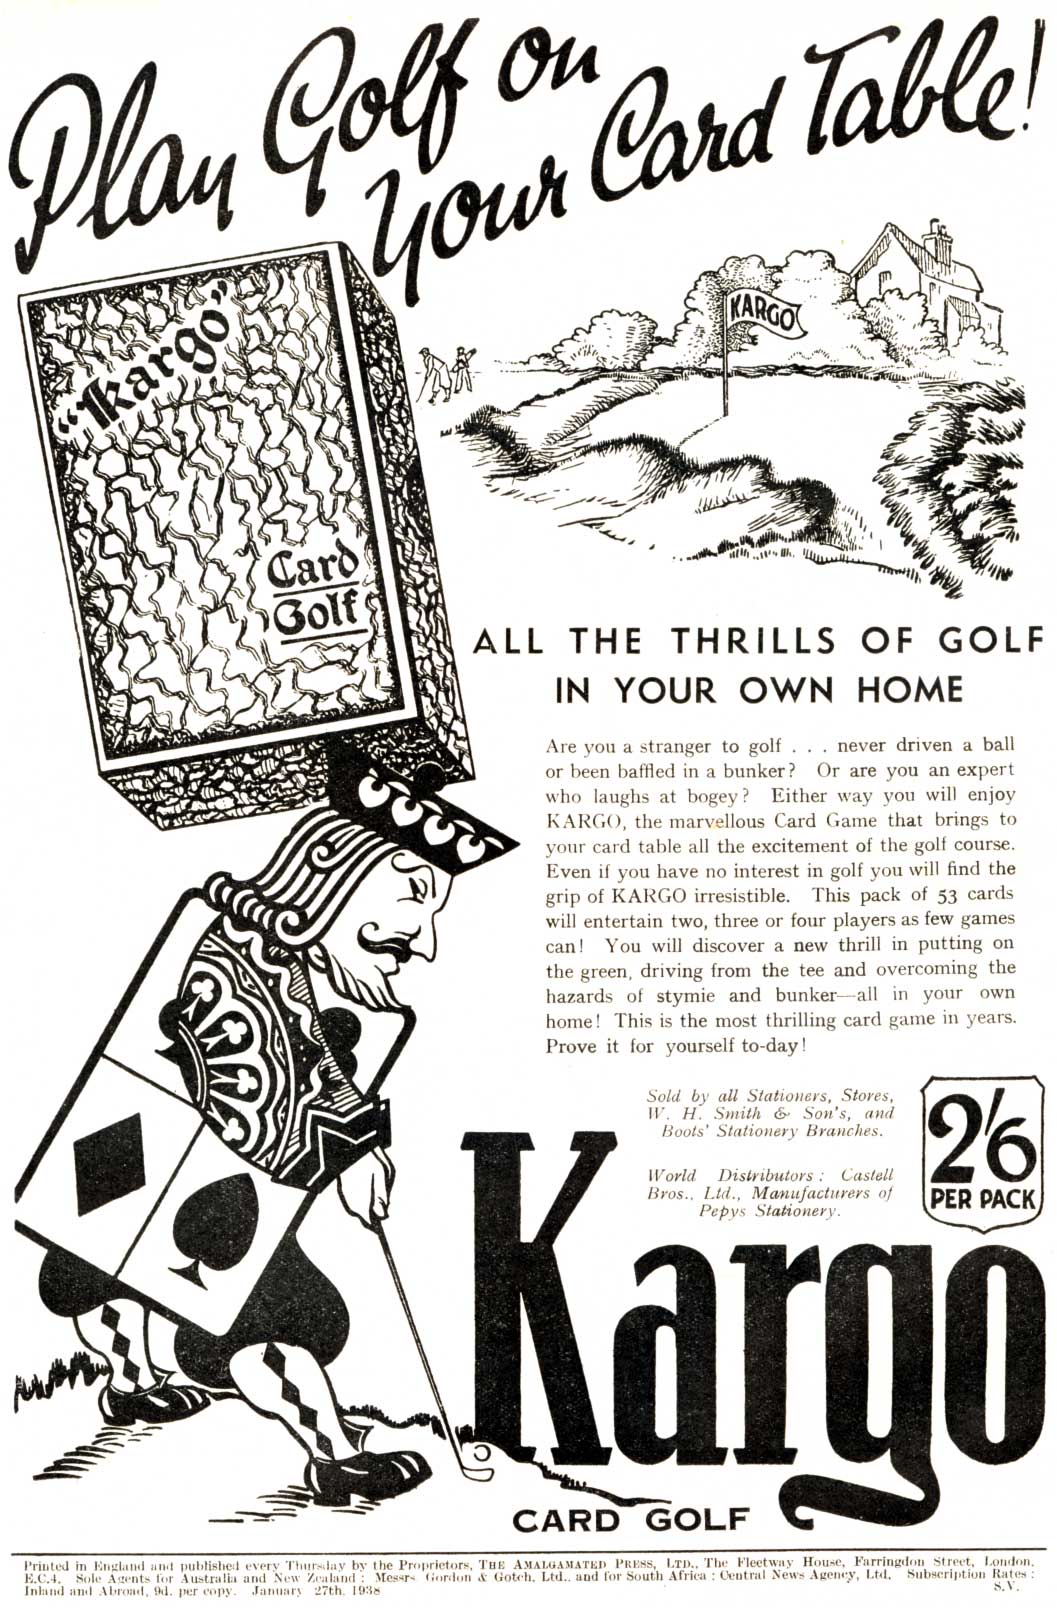 Kargo golf card game manufactured by Castell Brothers Ltd for Pepys Games, c.1936